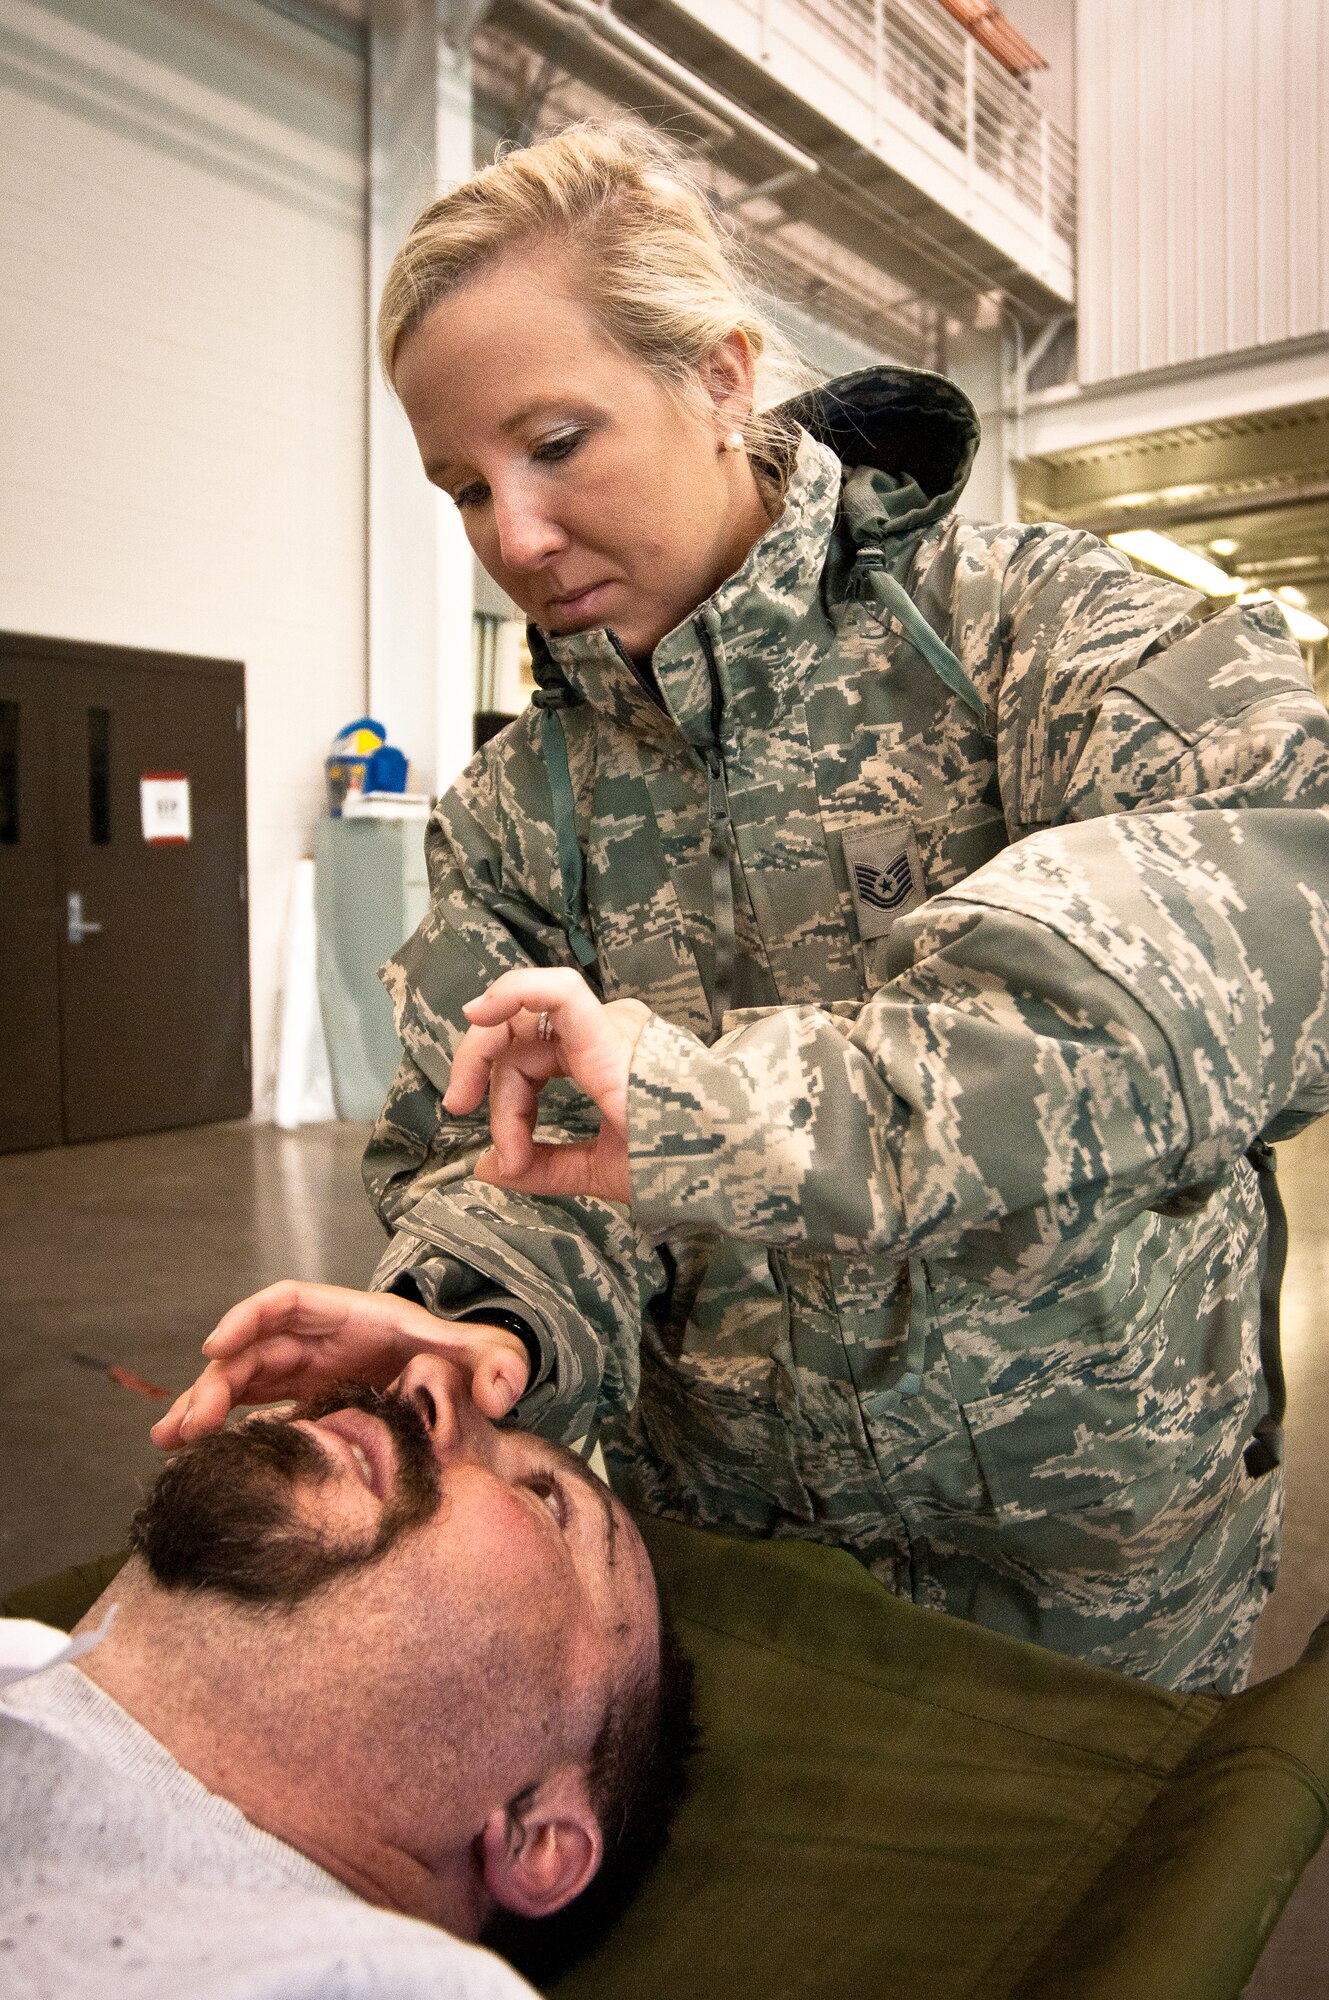 Tech. Sgt. Heather Speidel, a medic with the Kentucky Air National Guard’s 123rd Medical Group, simulates inserting a breathing tube in the windpipe of a notional plane-crash victim during earthquake-response exercises held May 18, 2011, at the Kentucky Air National Guard Base in Louisville, Ky. The exercises were designed to test the ability of the Department of Veterans Affairs and the Kentucky Air Guard to provide medical care following a major earthquake along the New Madrid fault line. (U.S. Air Force photo by Maj. Dale Greer)